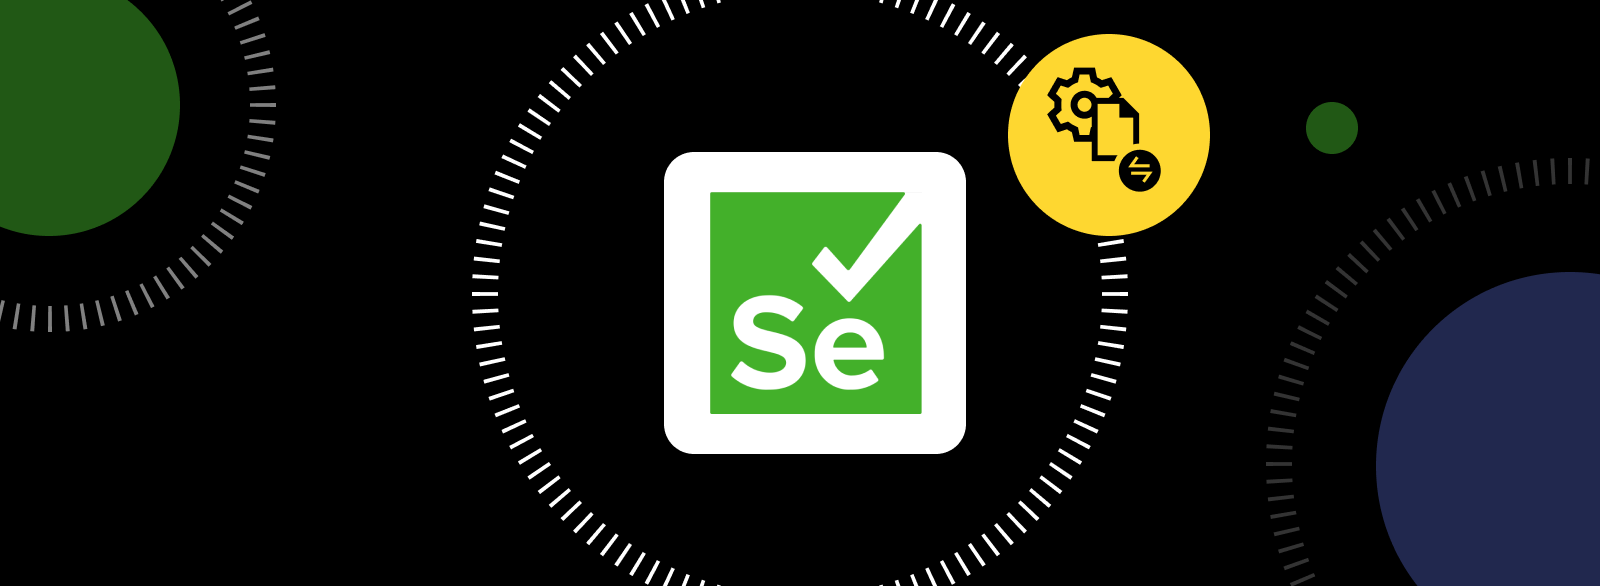 Synthetic monitoring with Selenium tutorial